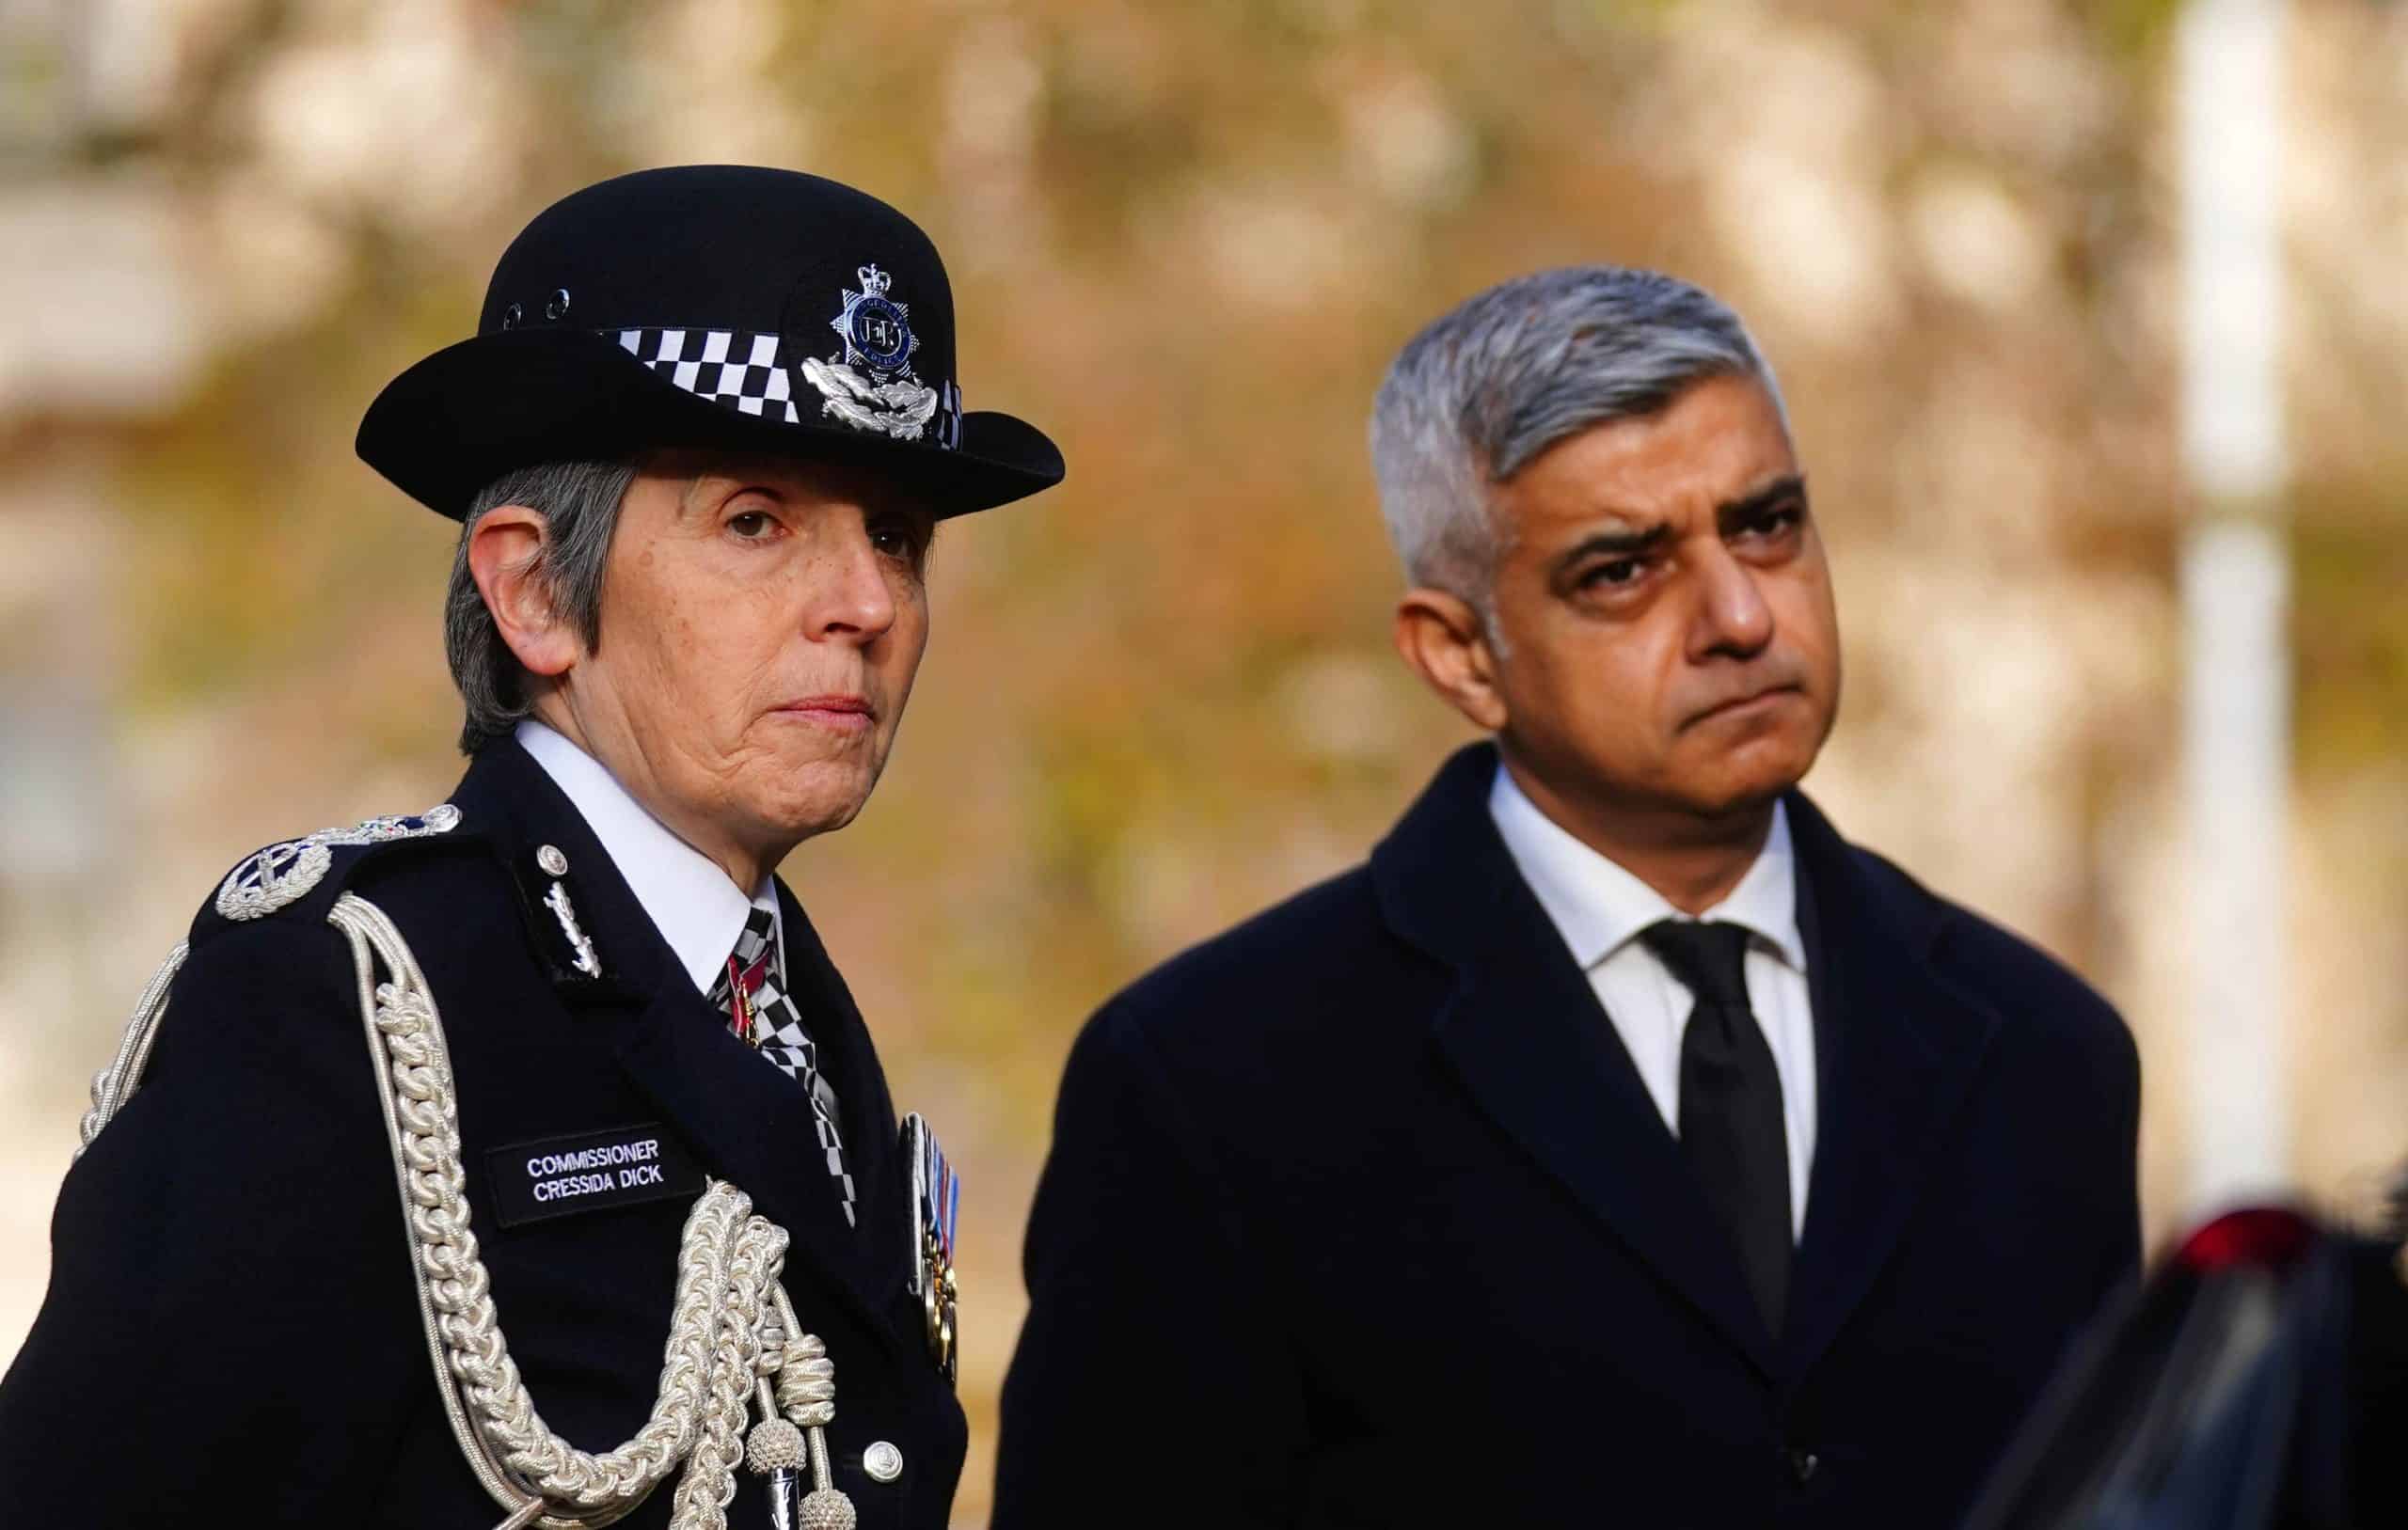 Glass houses? We have no faith in mayor, says Met Police Federation